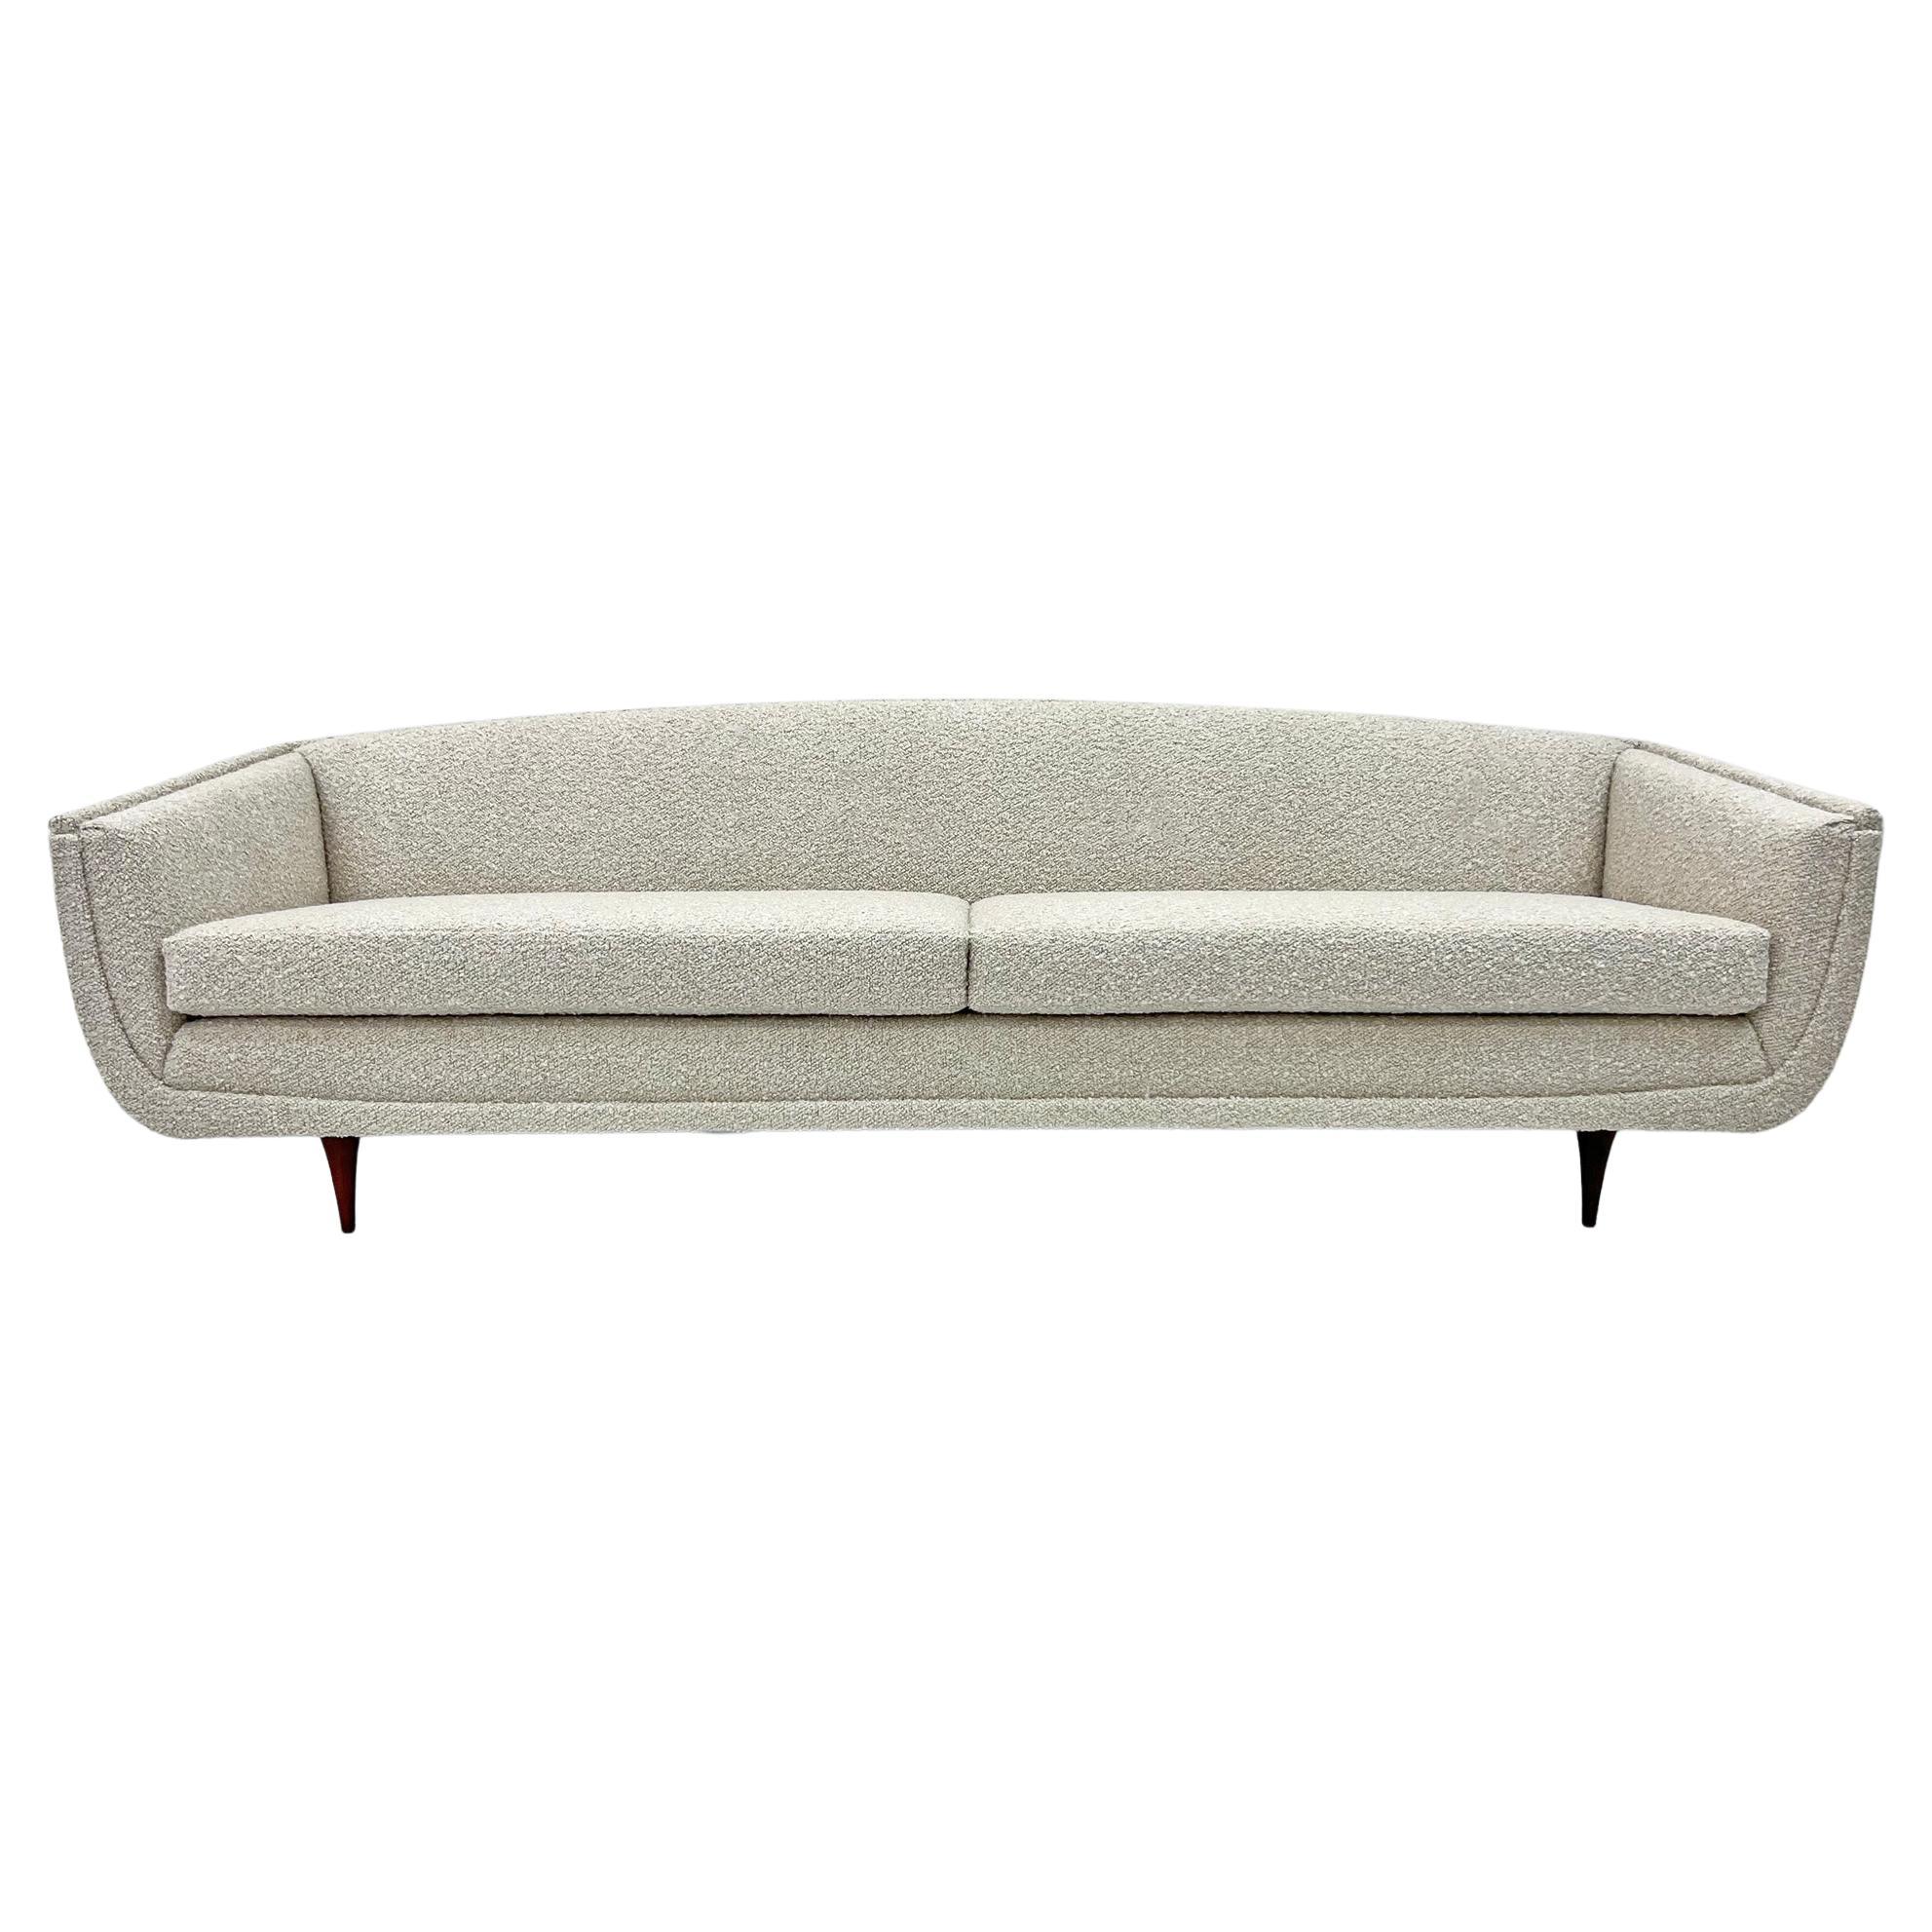 Mid-Century Sofa in Oatmeal Belgian Boucle Attributed to William Hinn